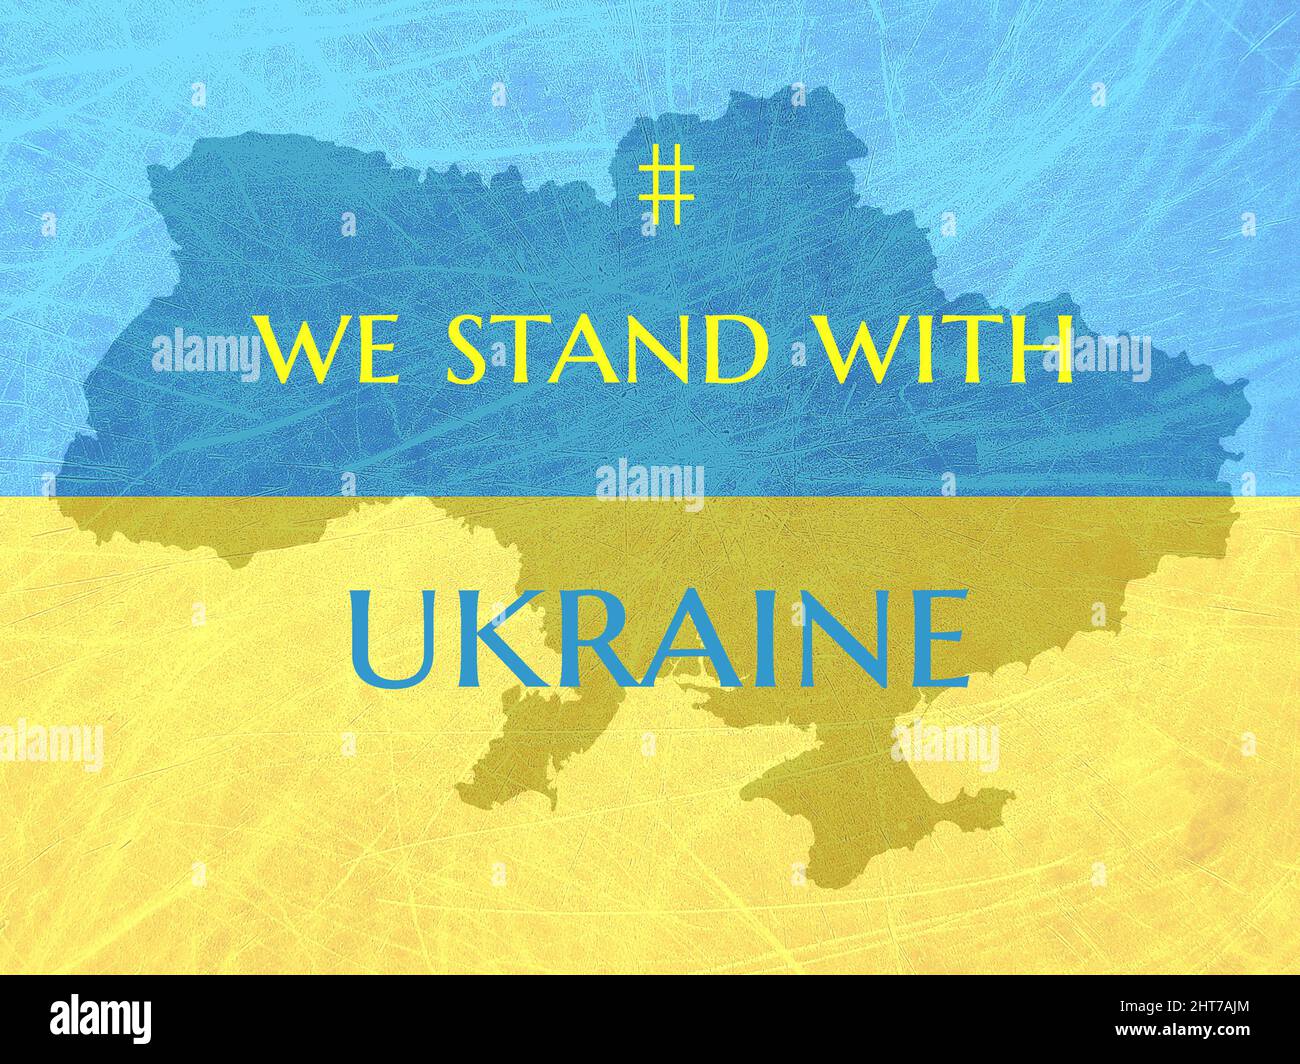 Flag and map of Ukraine. We stand with Ukraine text. Russian Ukrainian war concept. Global people resistance alliance message Stock Photo